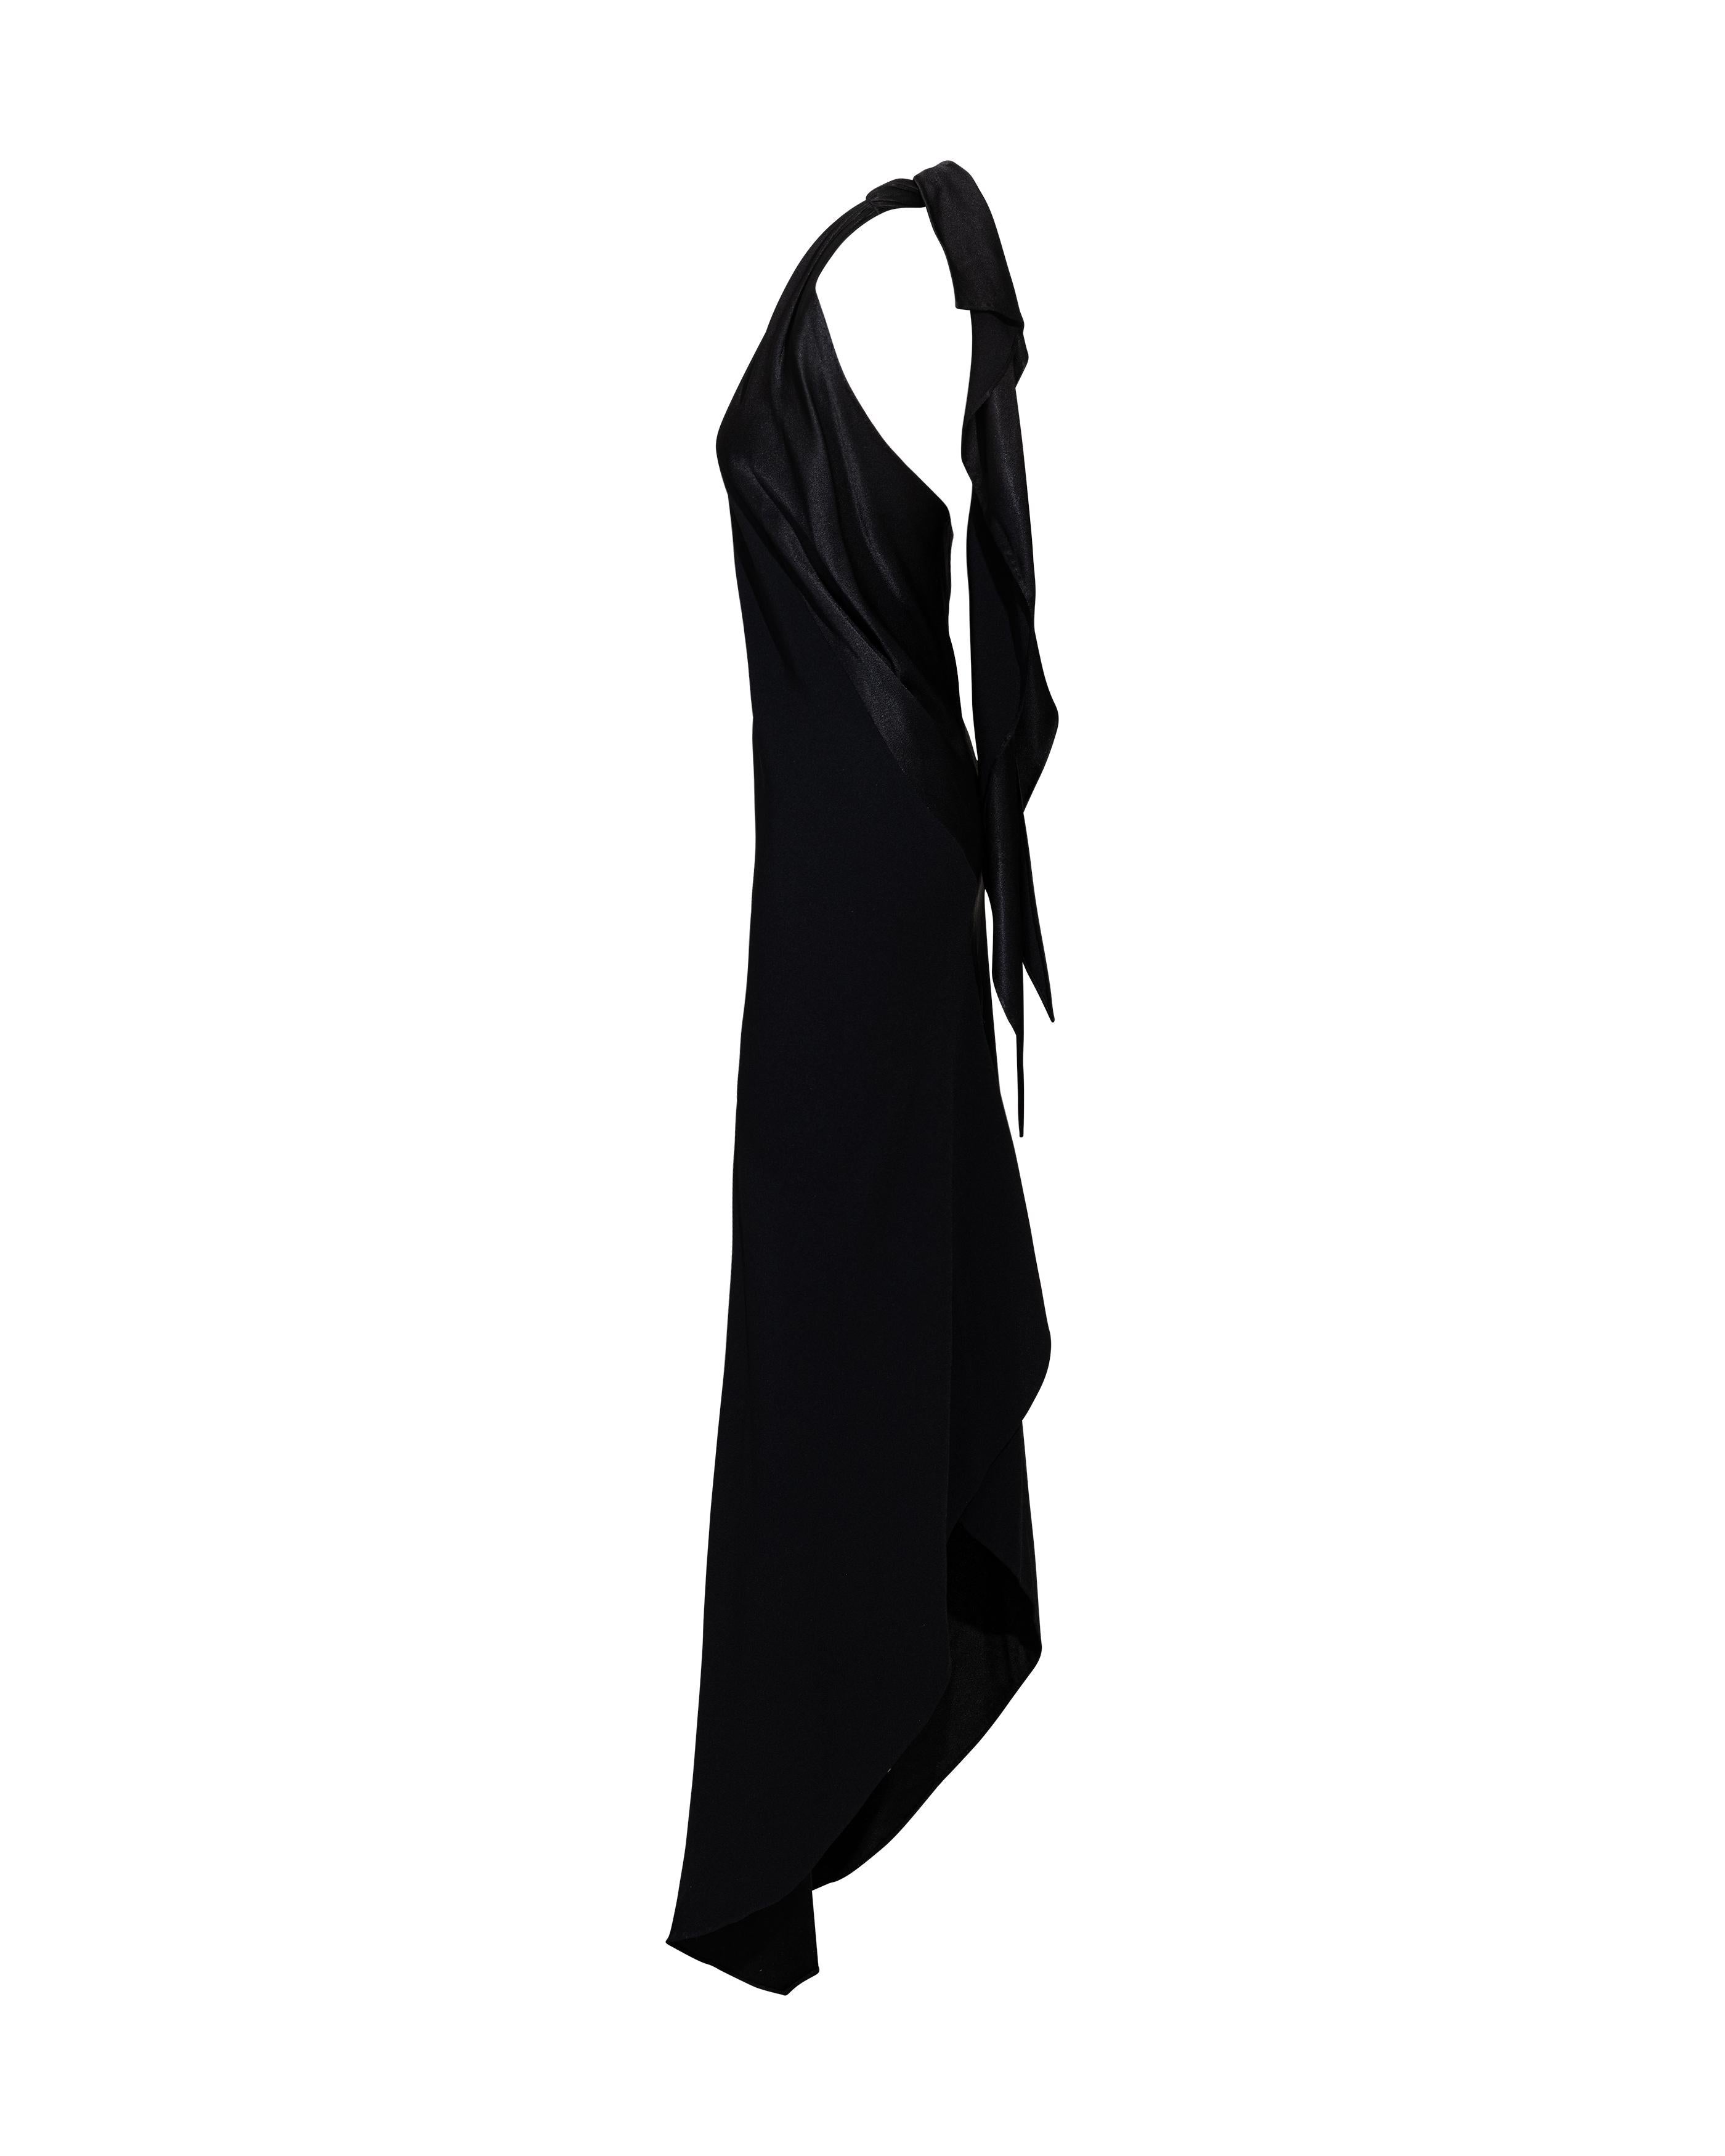 c. 1973 Halston Black Silk Charmeuse Bias Cut Halter Gown In Excellent Condition In North Hollywood, CA